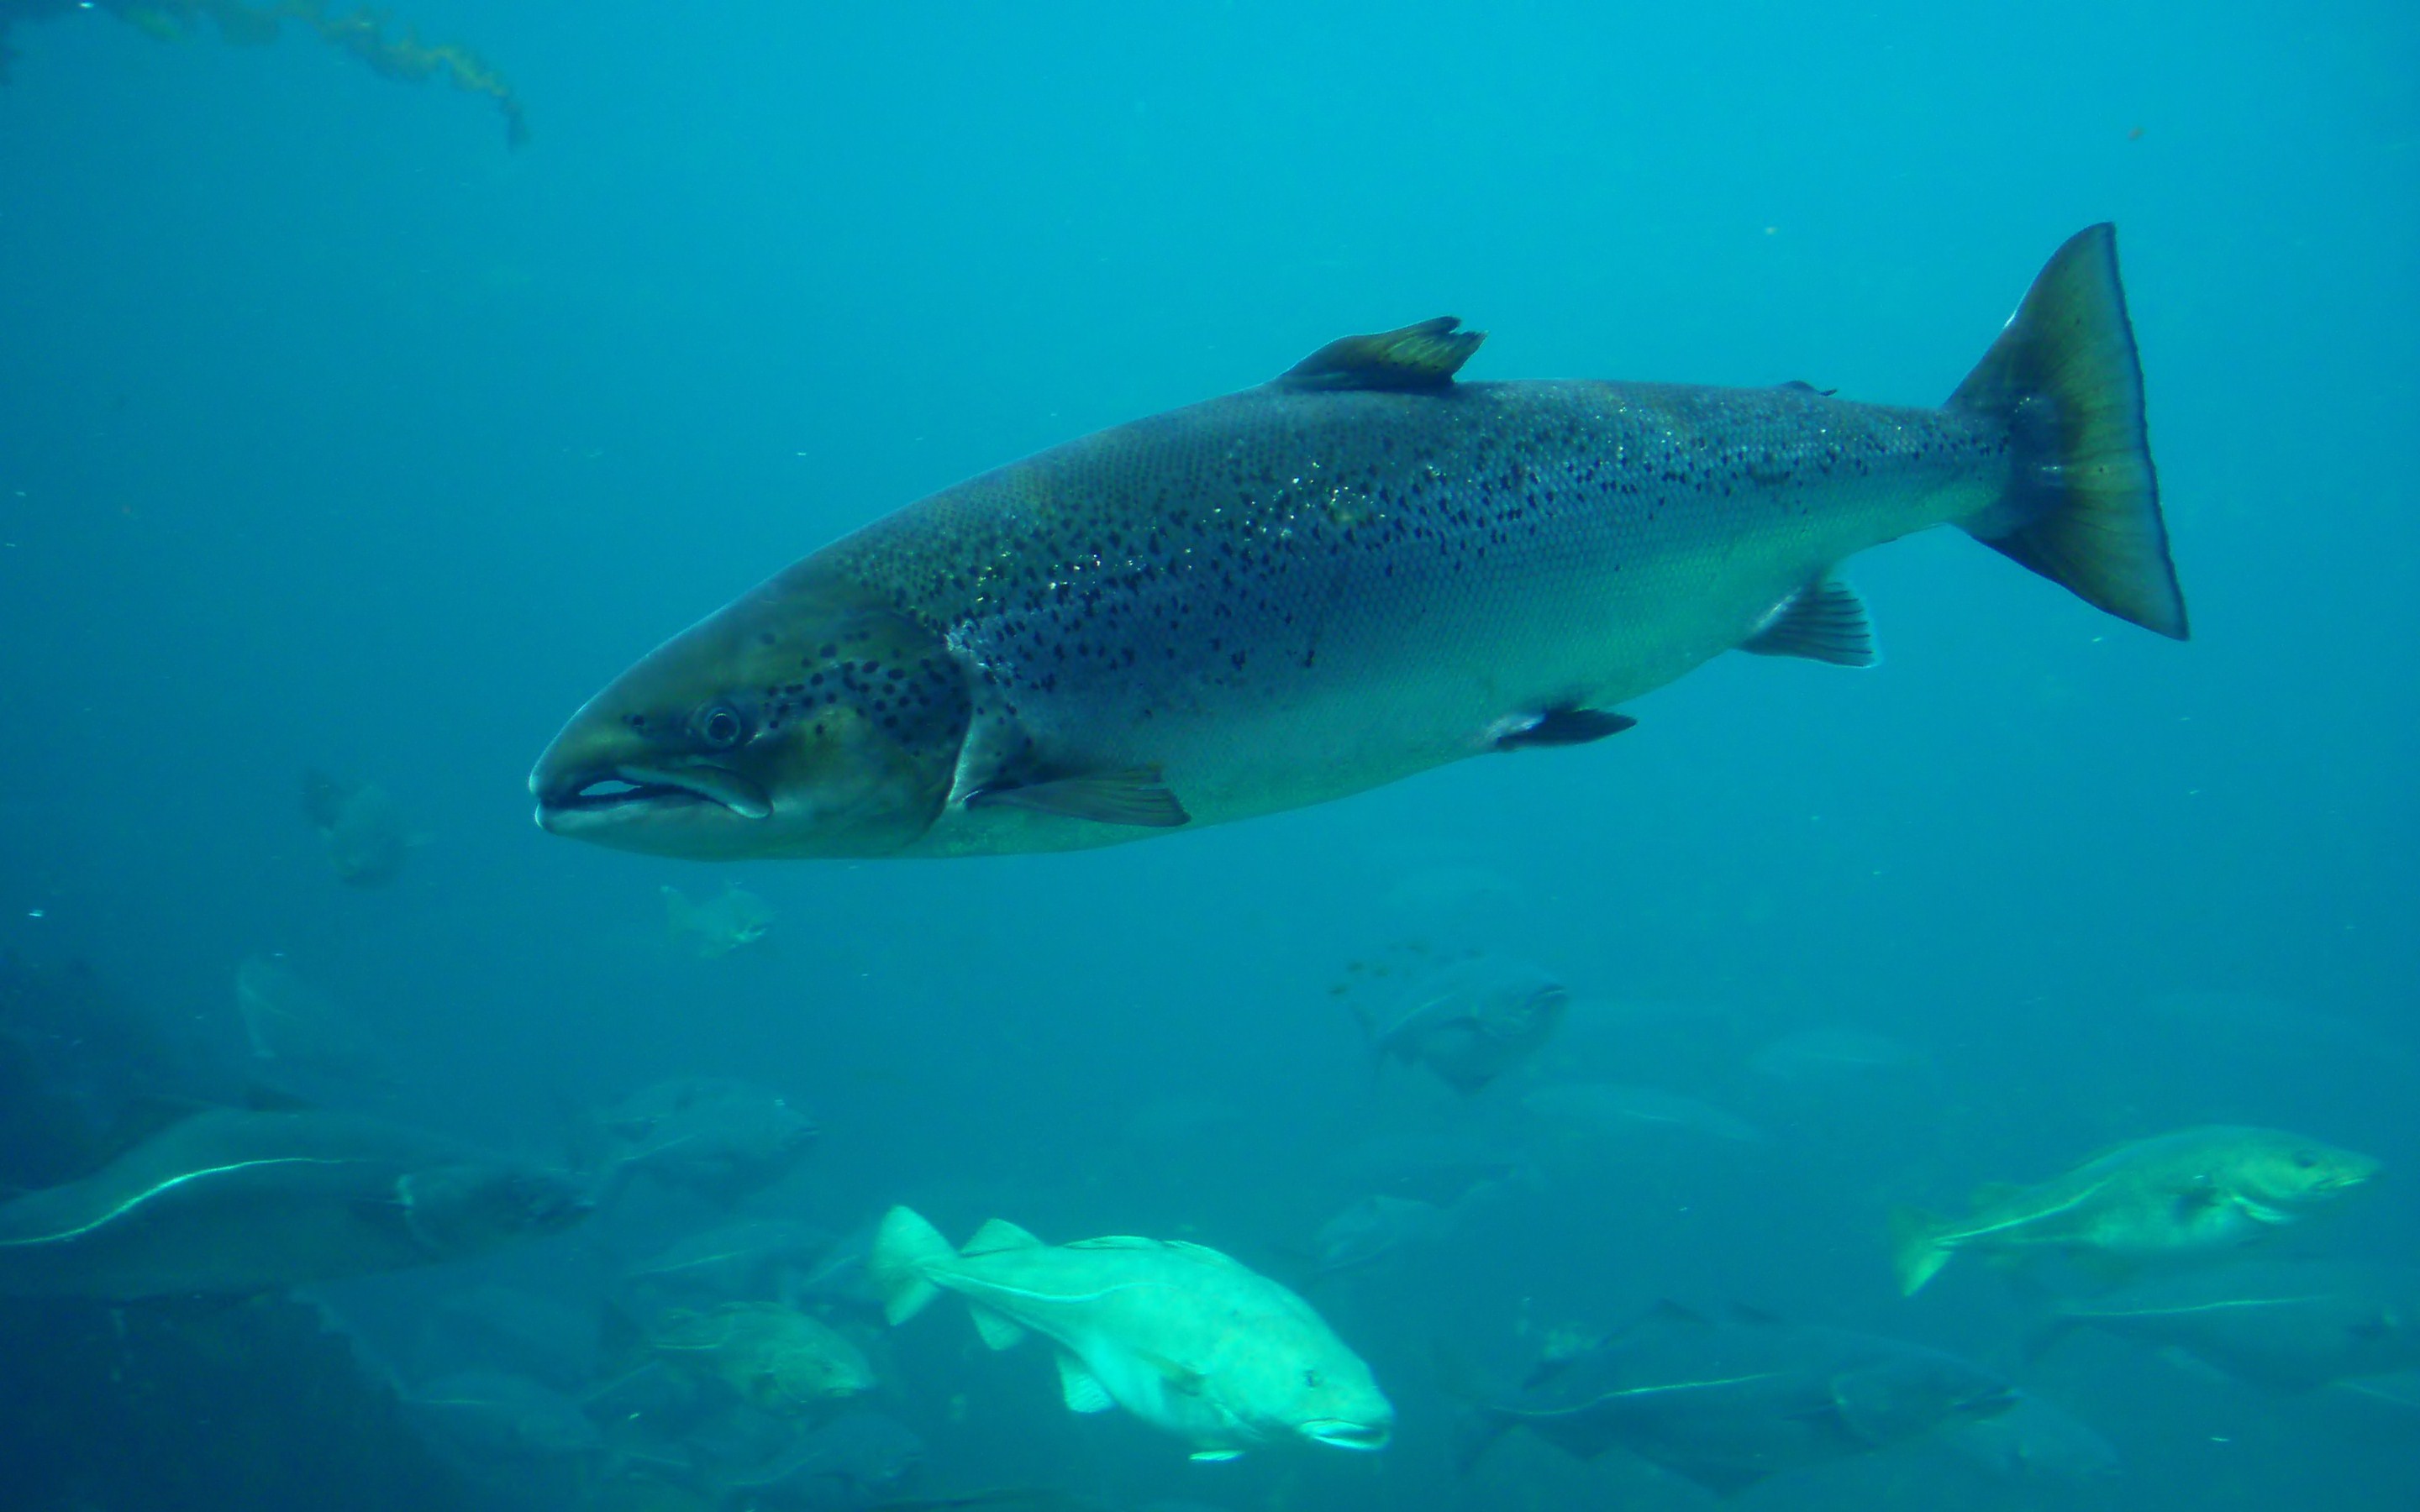 Salmon Is Swimming Under Water Background Pictures Of A Chinook Salmon  Background Image And Wallpaper for Free Download